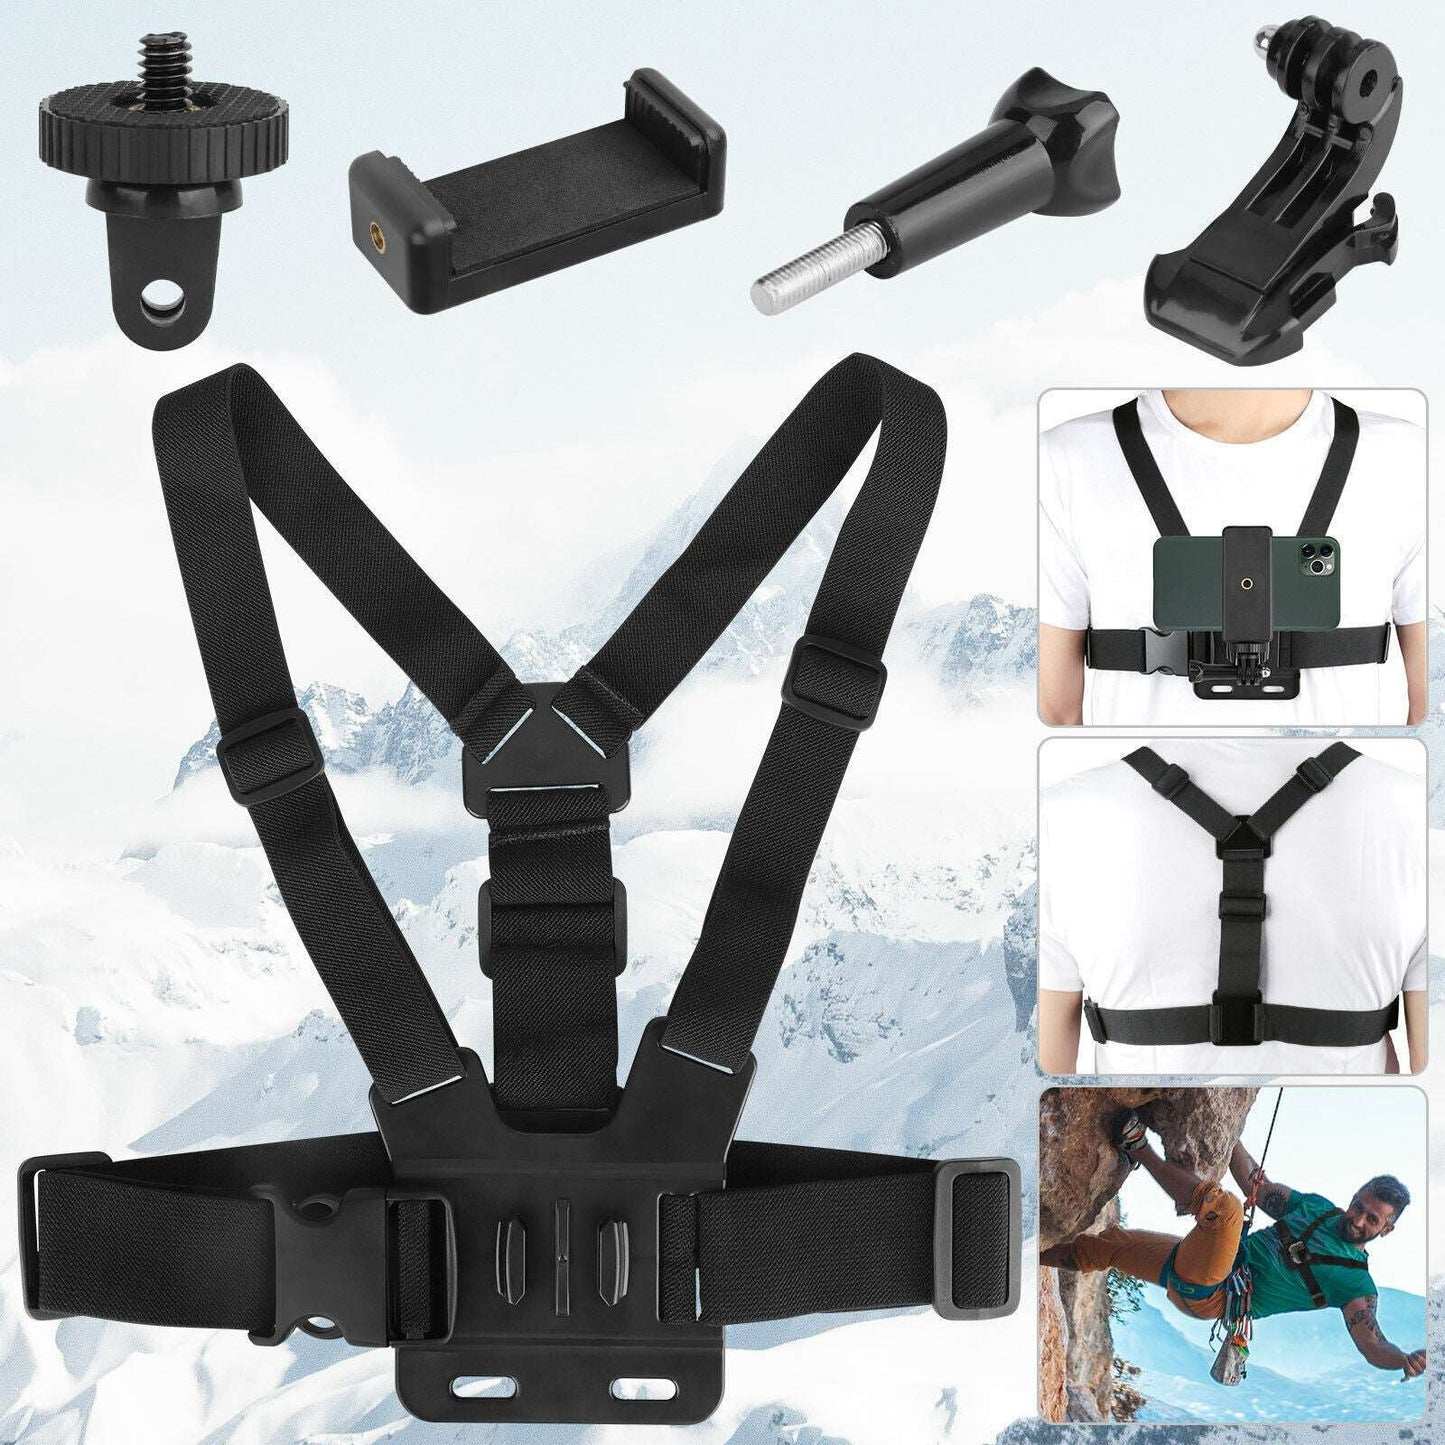 Chest Harness Body Strap Mount Accessories Adjustable For IPhone GoPro Android